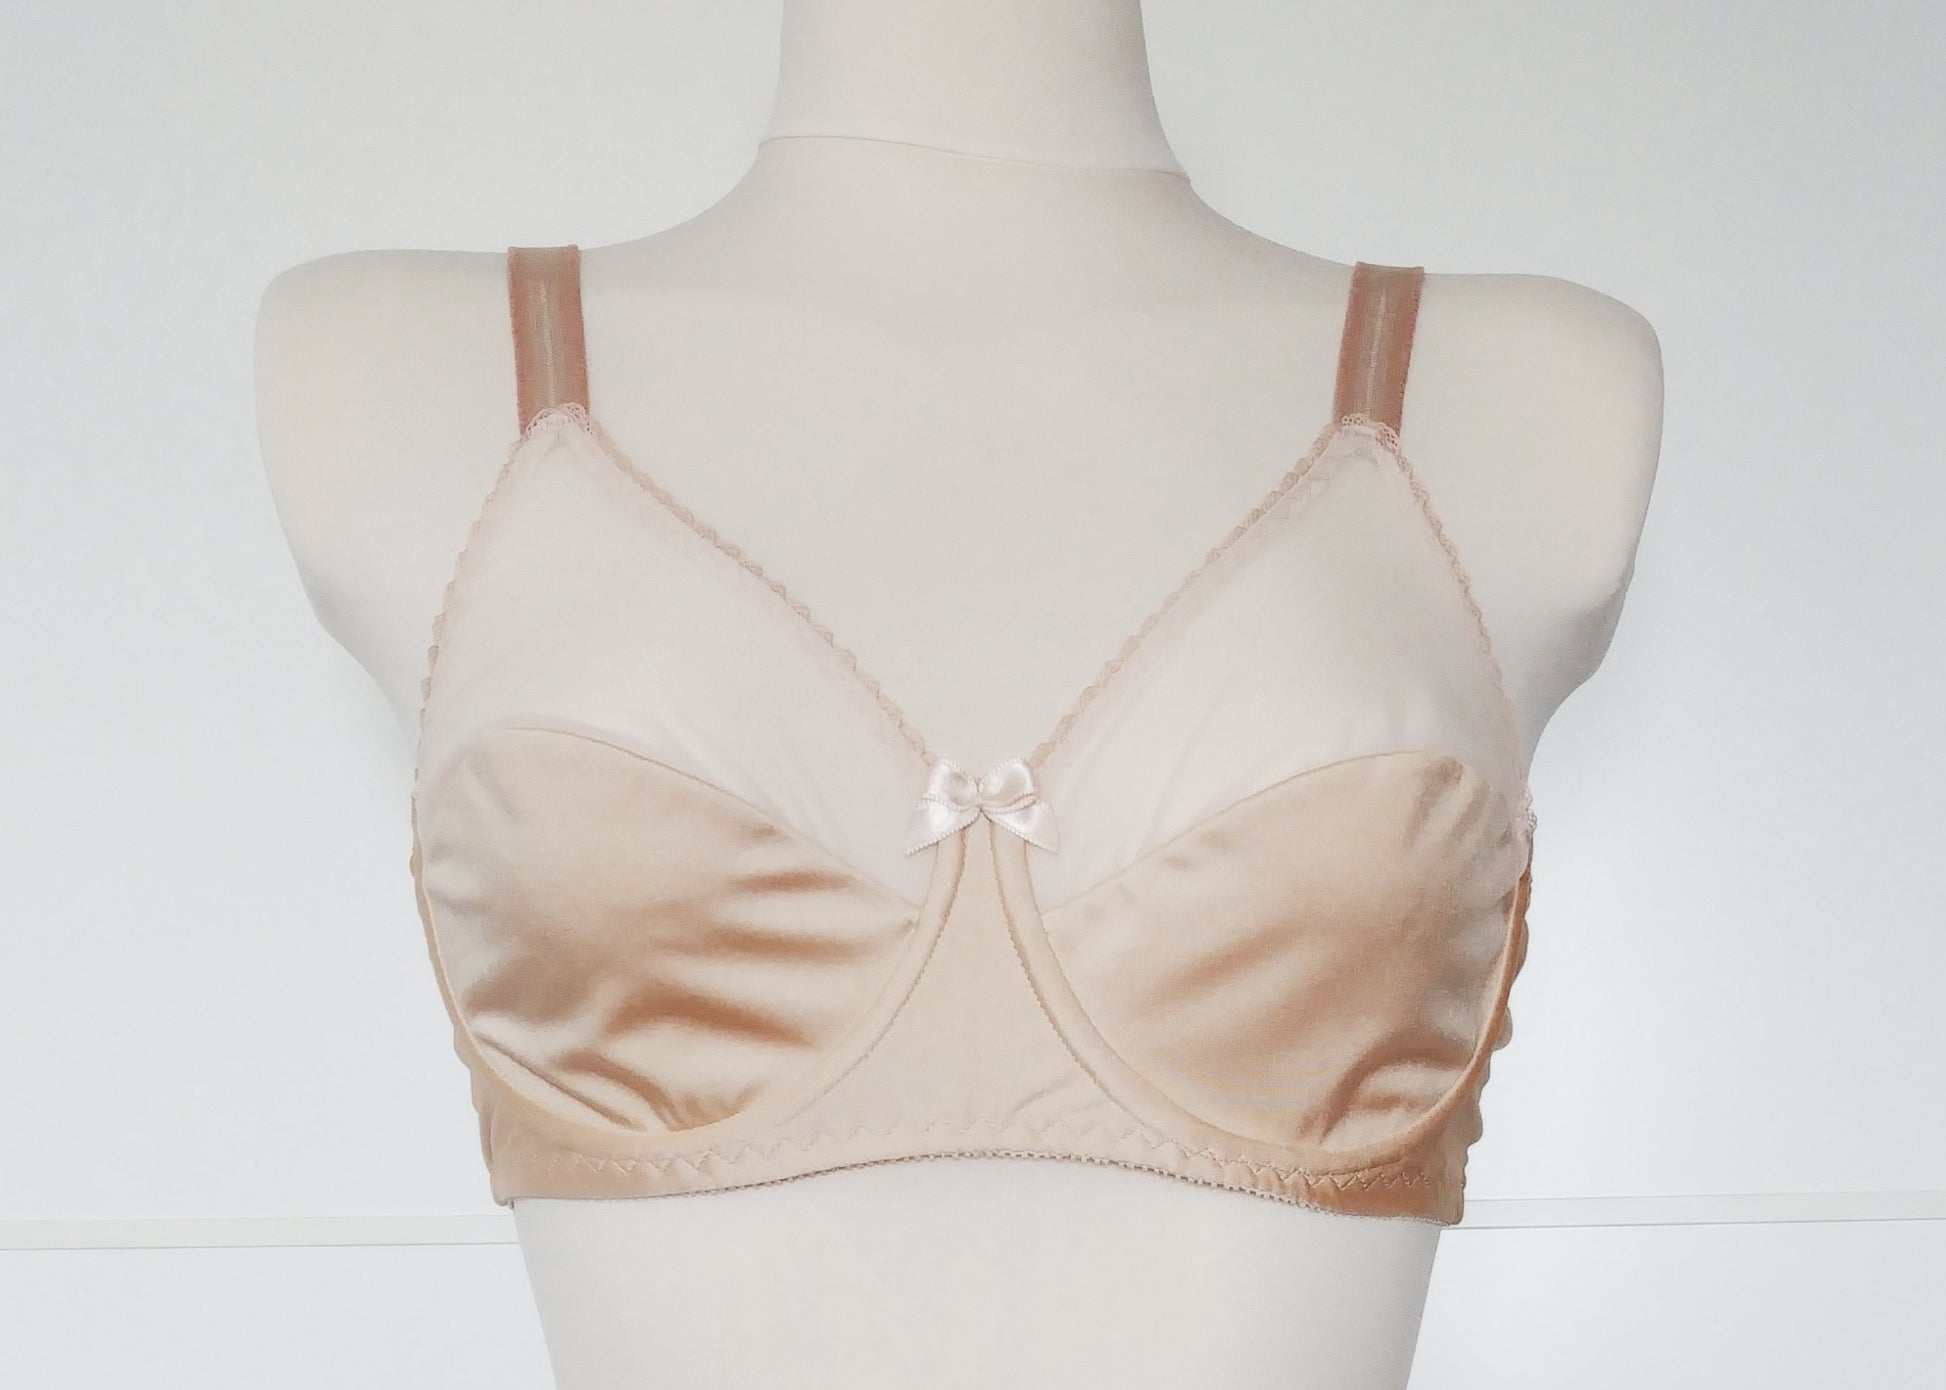 beige-nude semi transparent full cup soft bra with wires